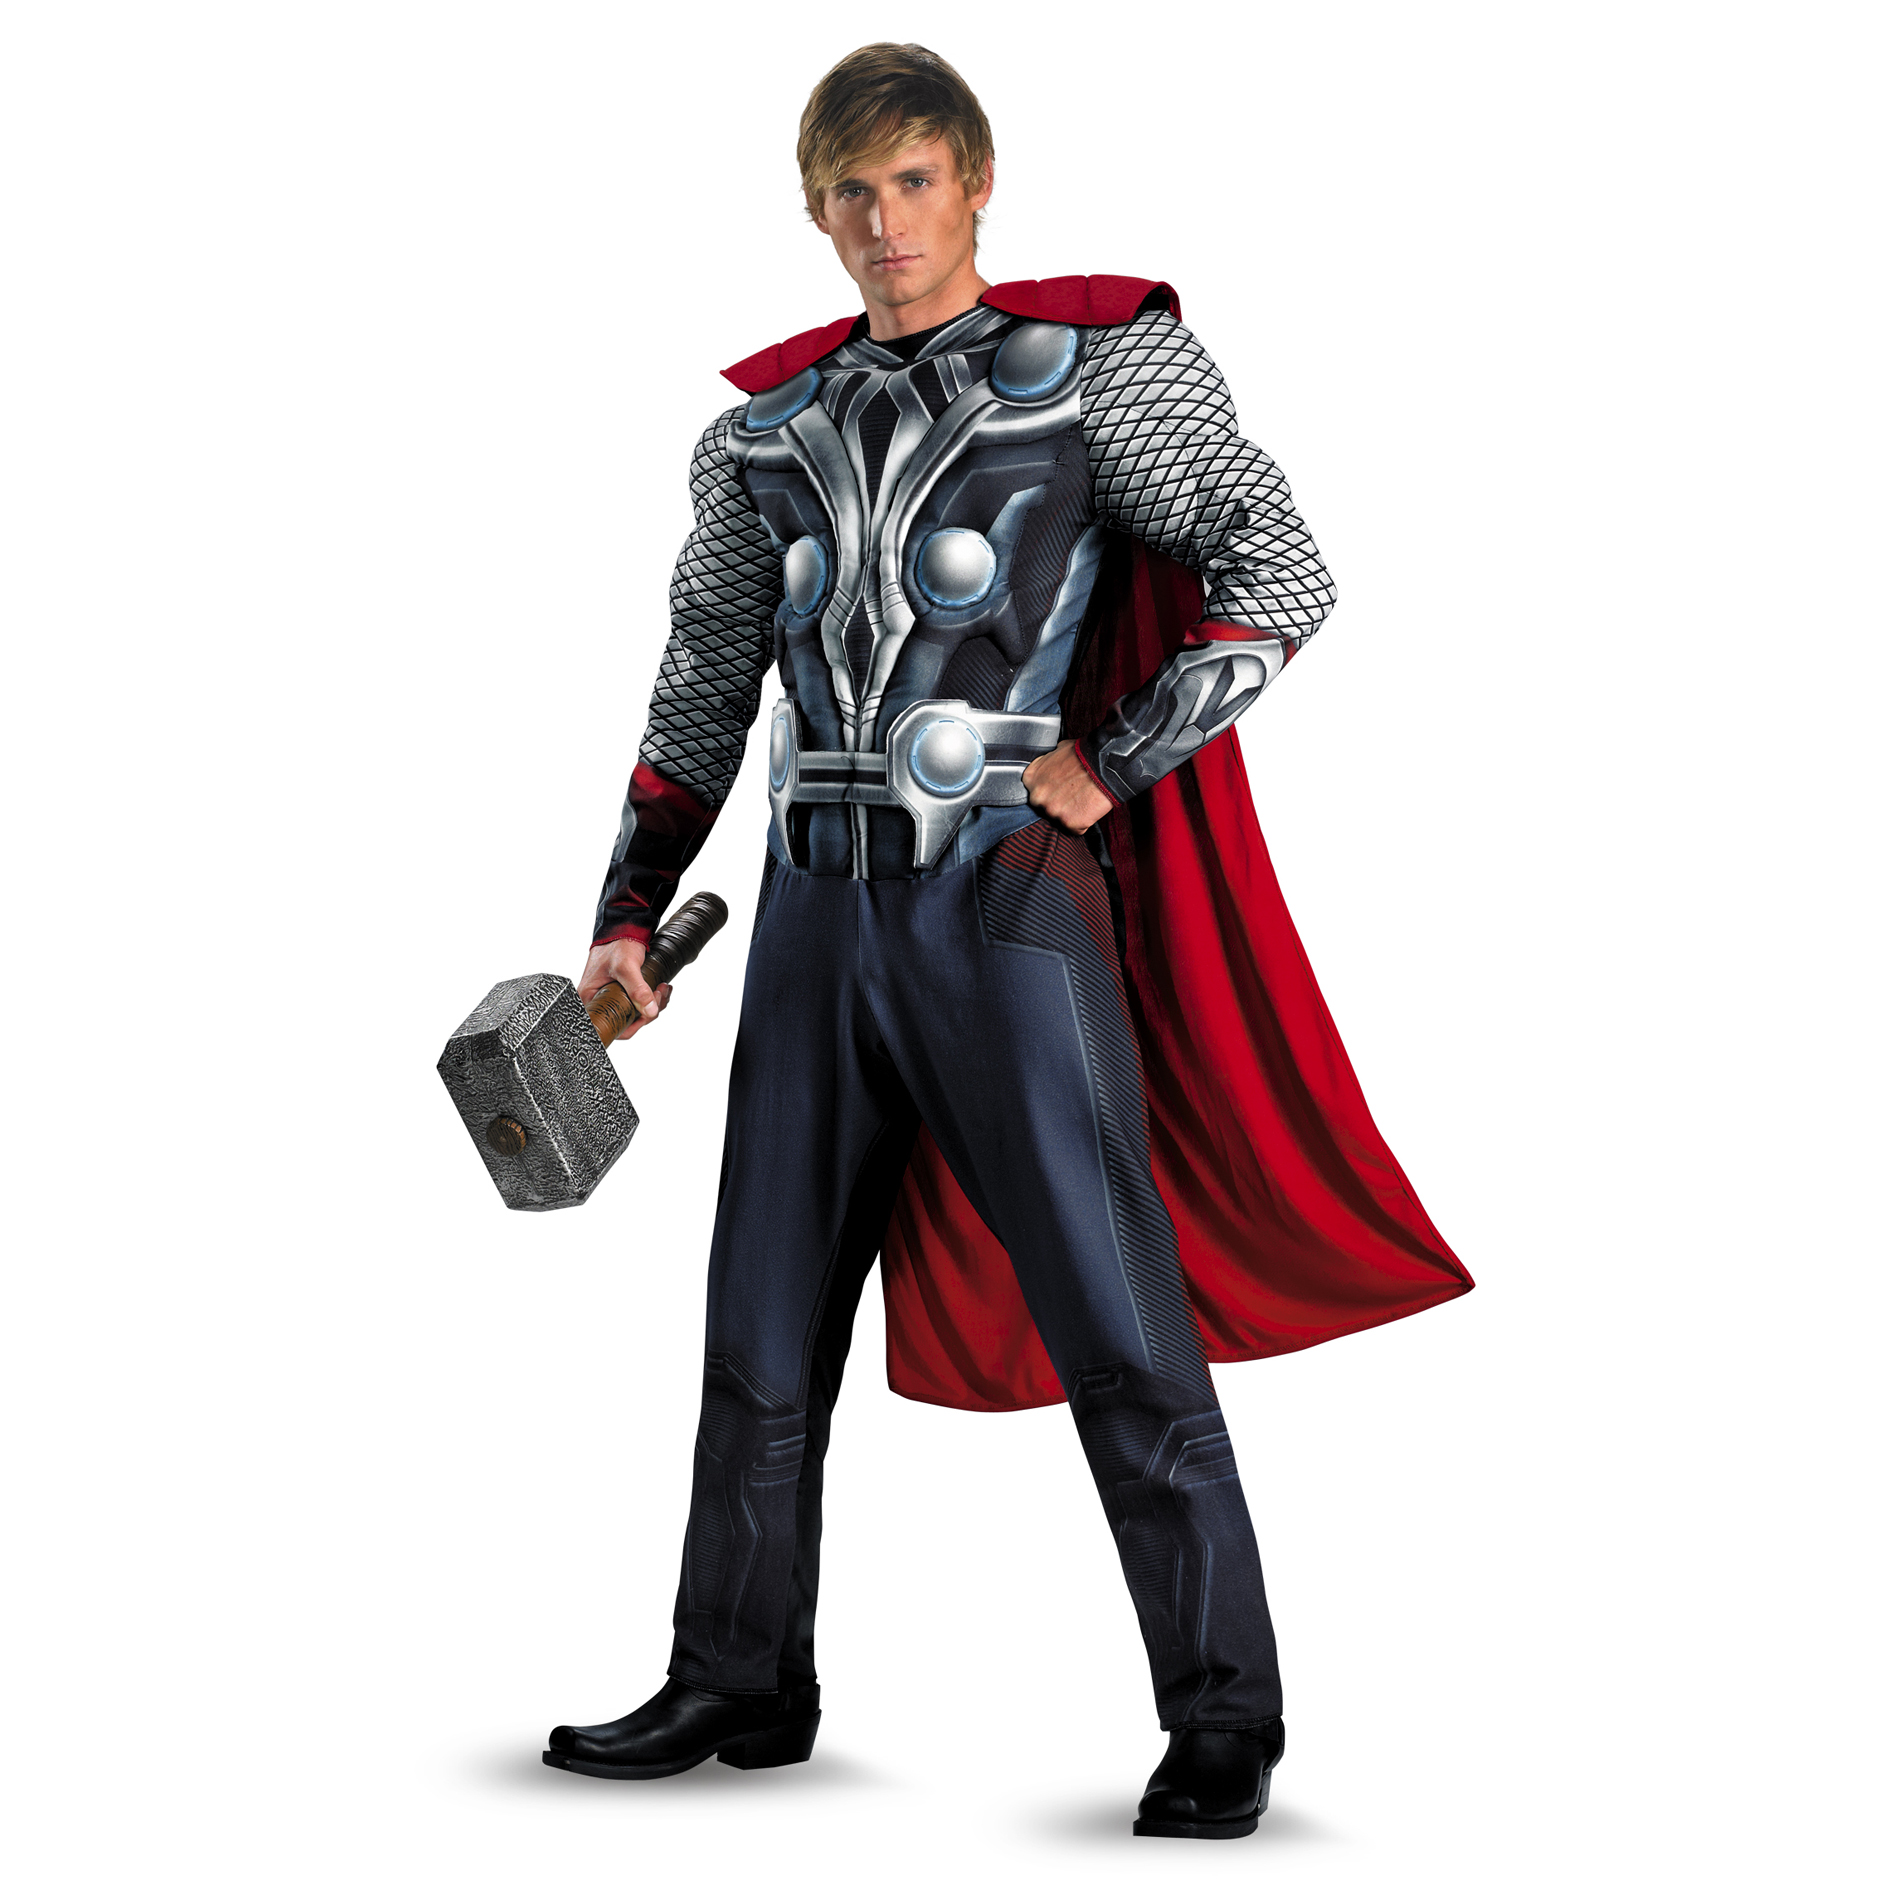 Thor Avengers Classic Muscle Adult Men's Halloween Costume